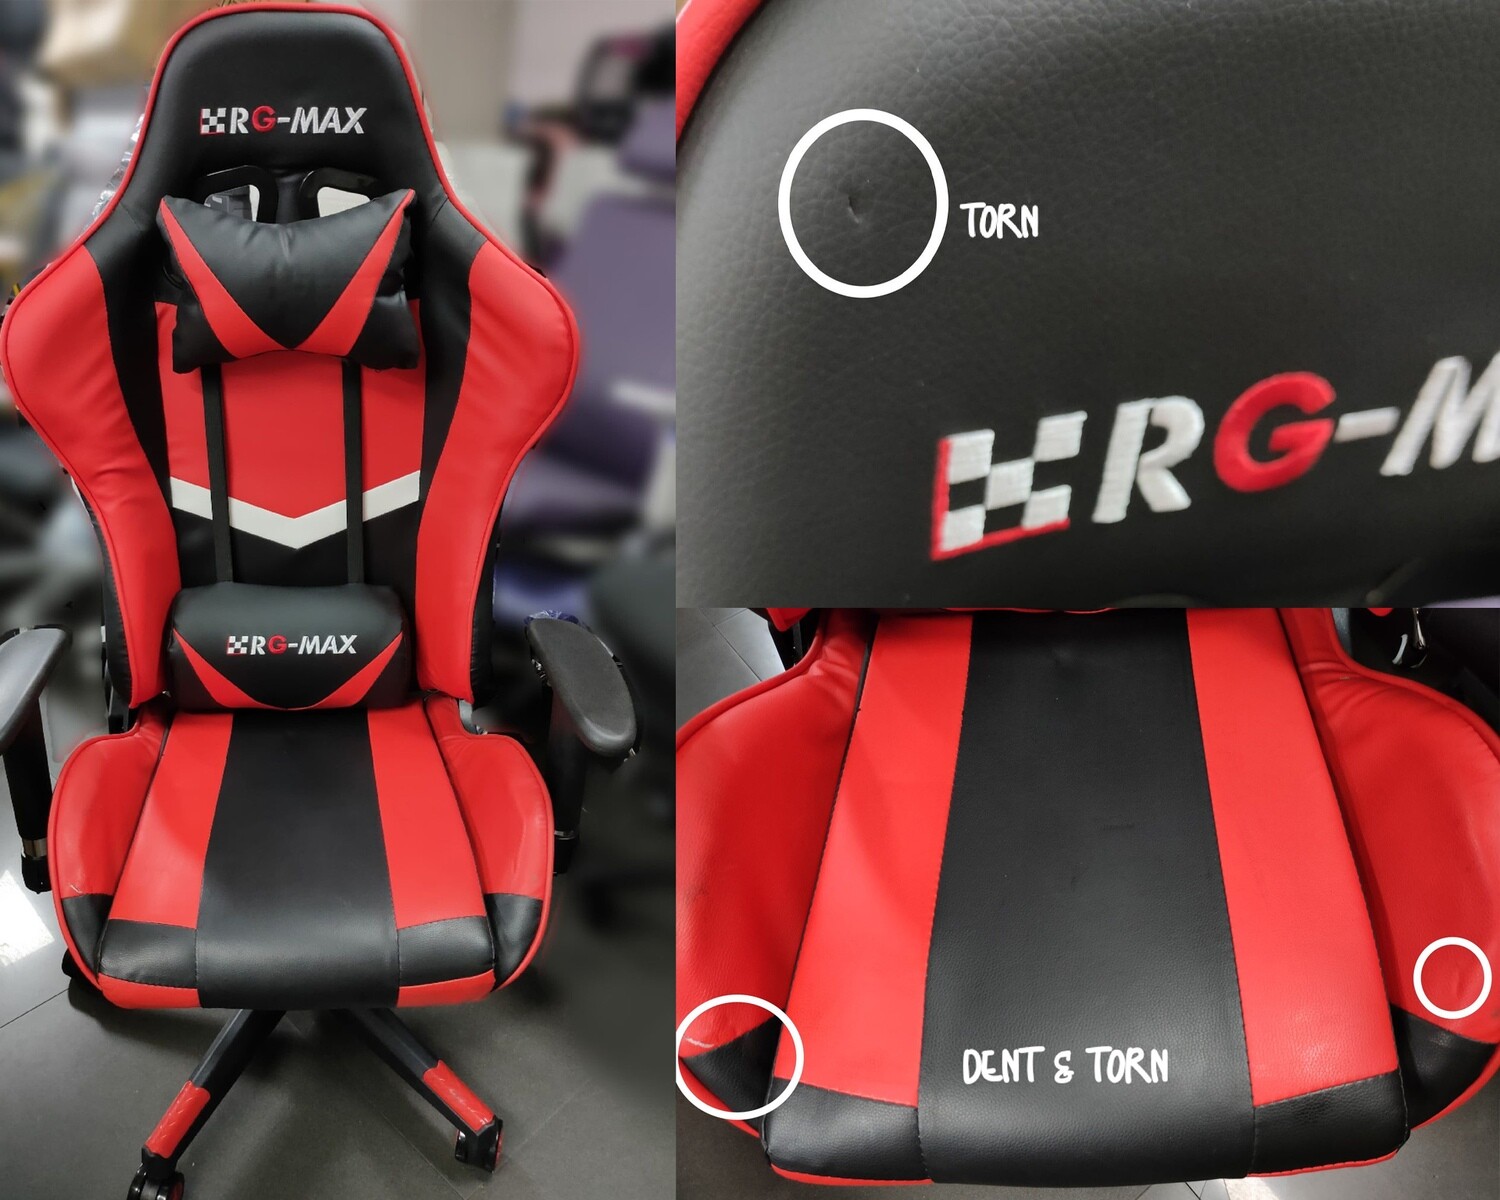 (Sale) OFX Samson Wide Body Cocoon Back Gaming Chair (Red-Black) (Dent/Torn/Light Scratches)